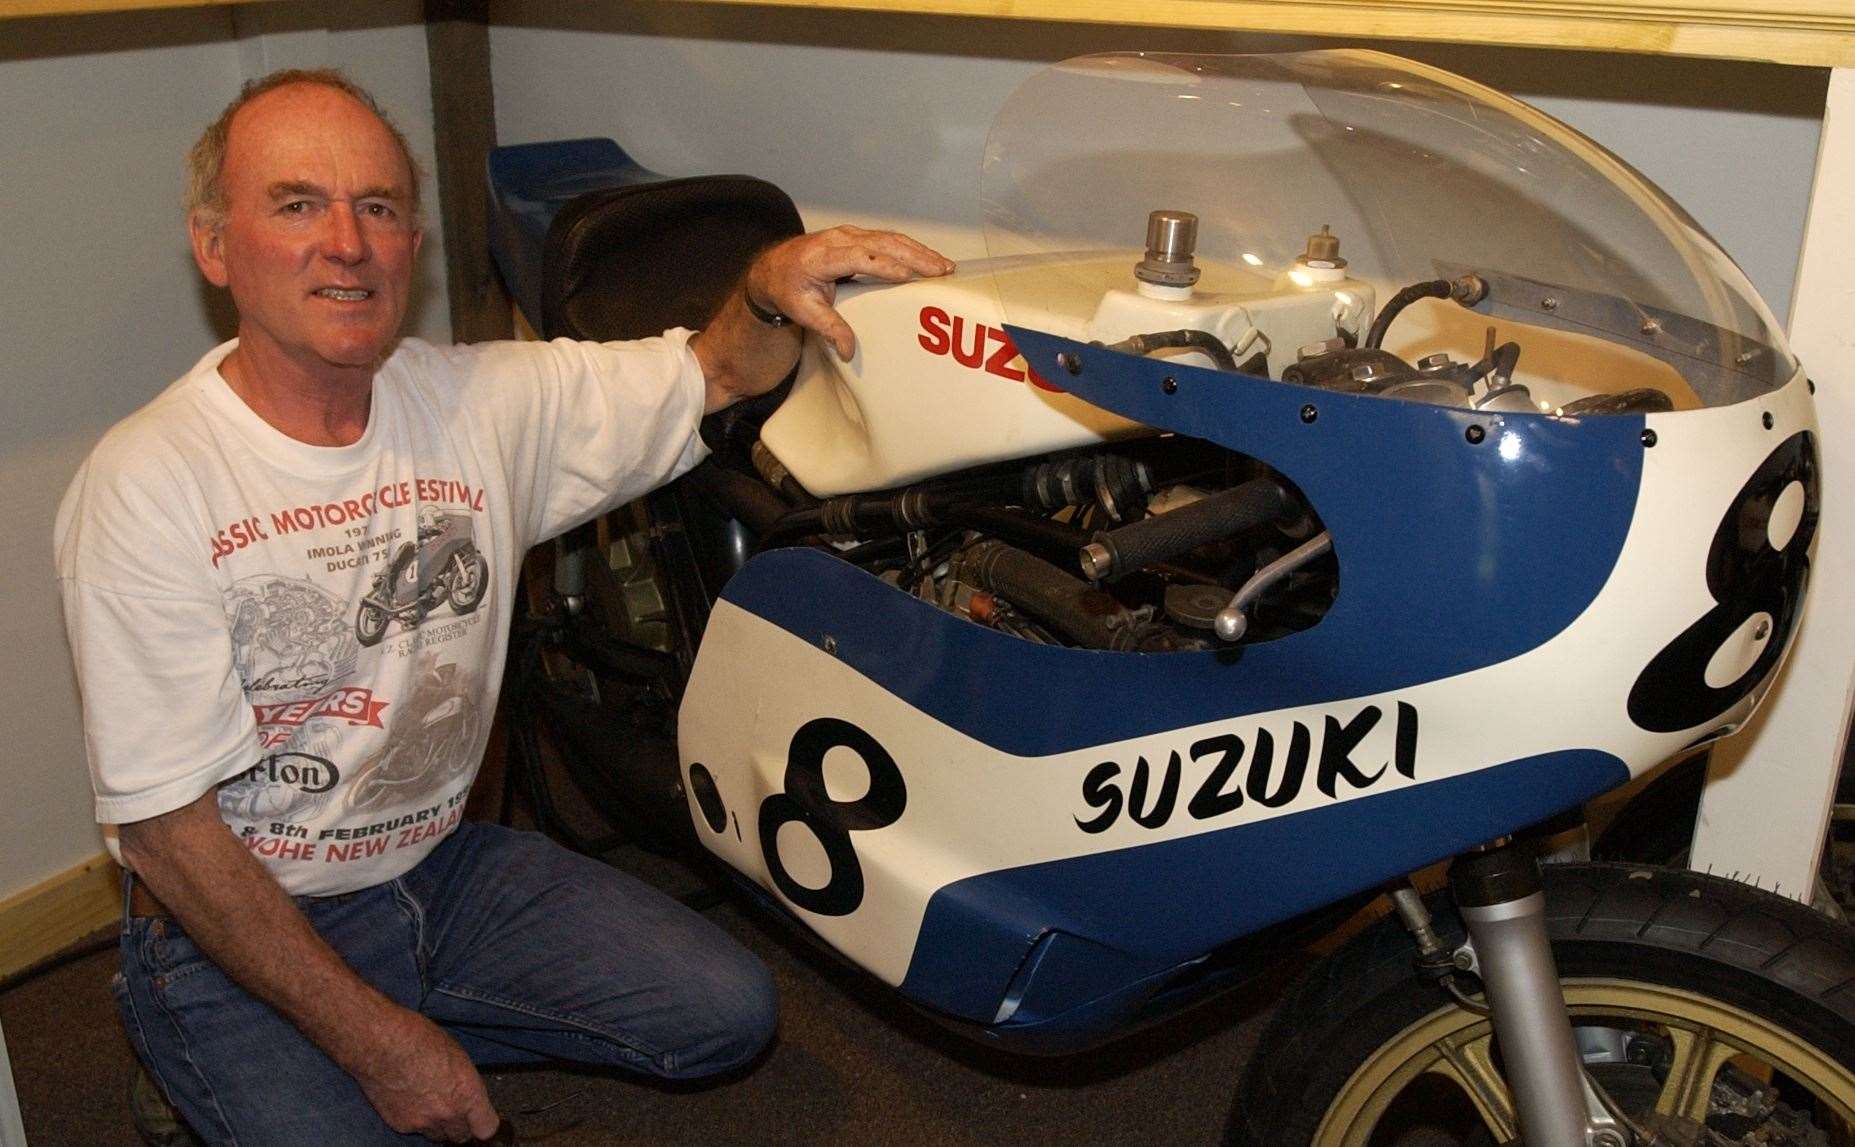 Motorcycling legend Paul Smart who died in an accident on the A21 Lamberhurst Bypass in October 2021